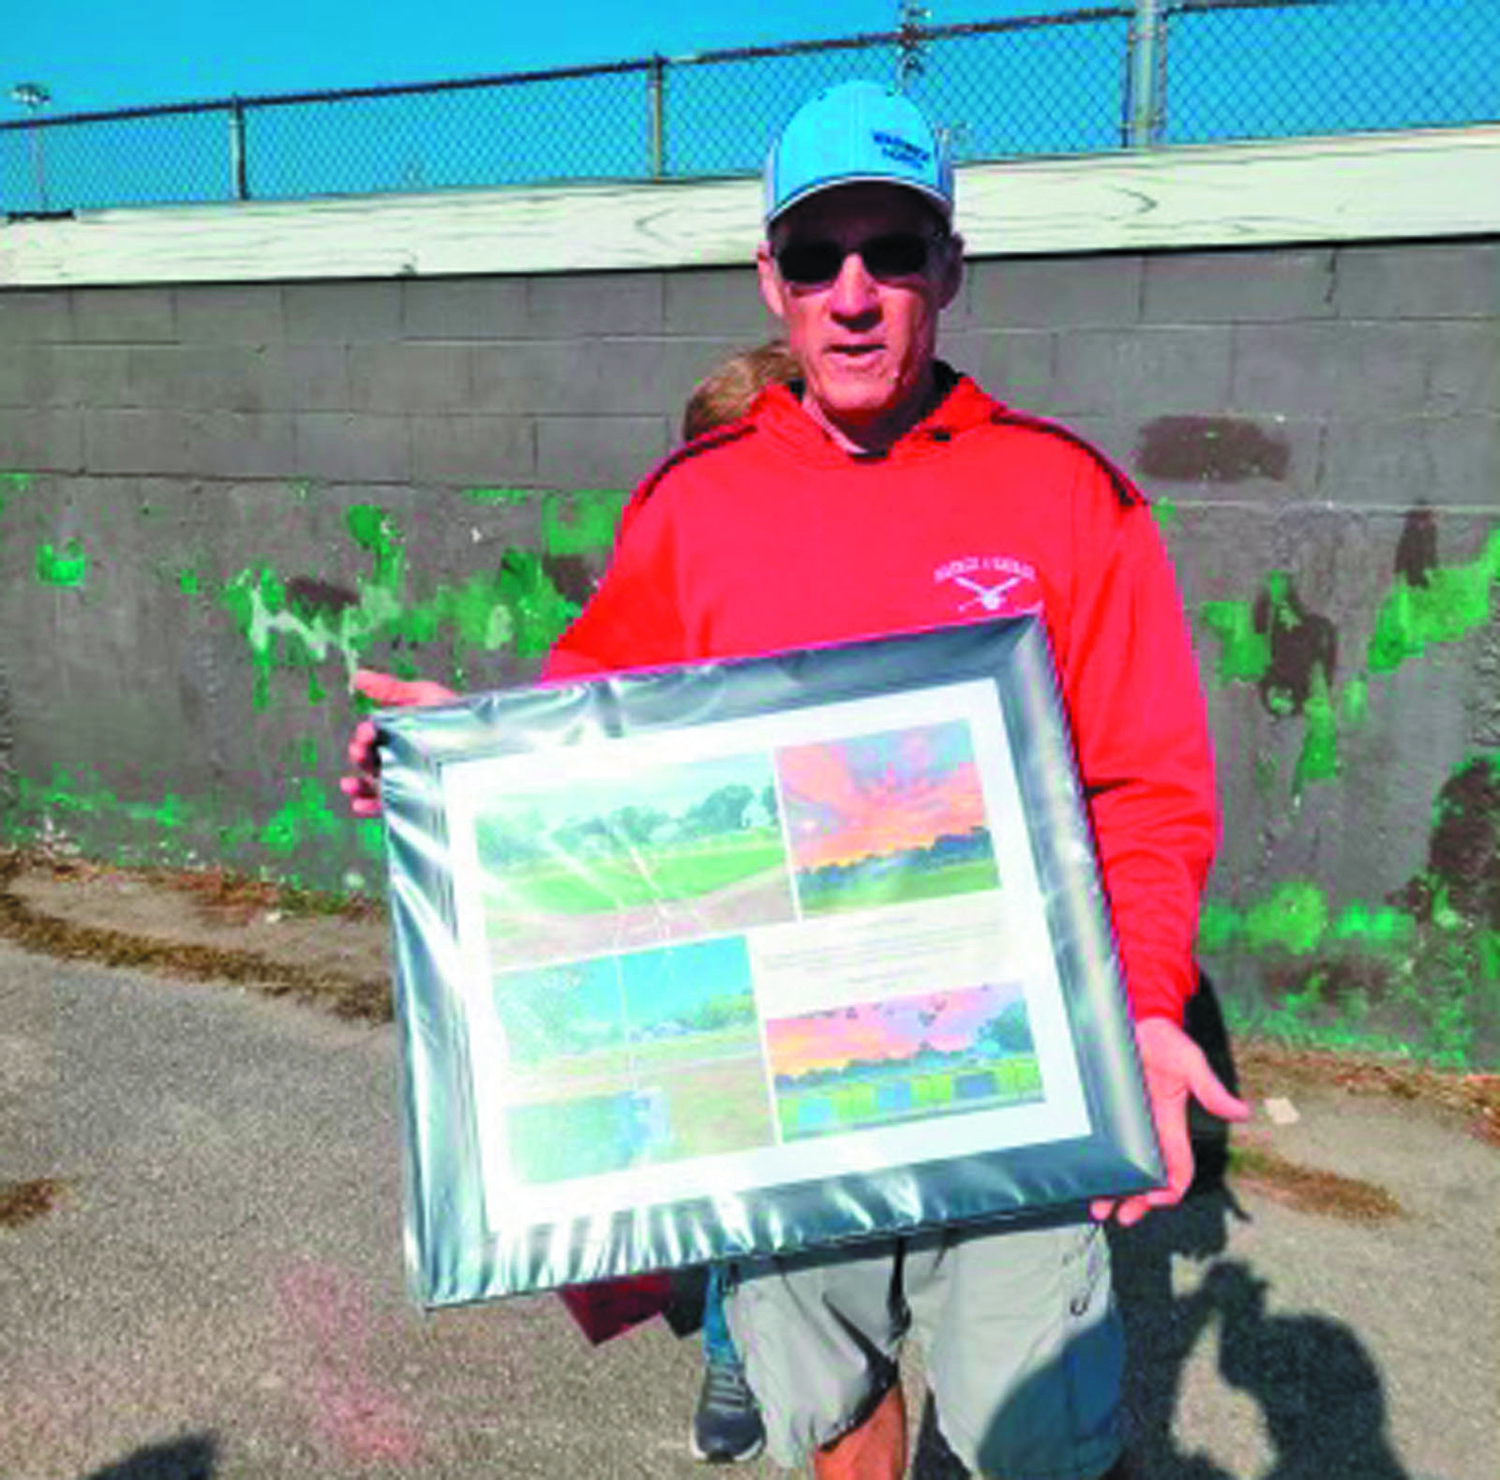 RETIREMENT: After over 30 years of volunteering,
Tom Doyle Sr. recently retired from Warwick North Little League. Doyle served a variety of roles during his time with the league, including being the vice president for a decade as well as many more years as a coach and jack of all trades. The league presented him with a frame with different memories of his time as a retirement gift during the fall ball season.